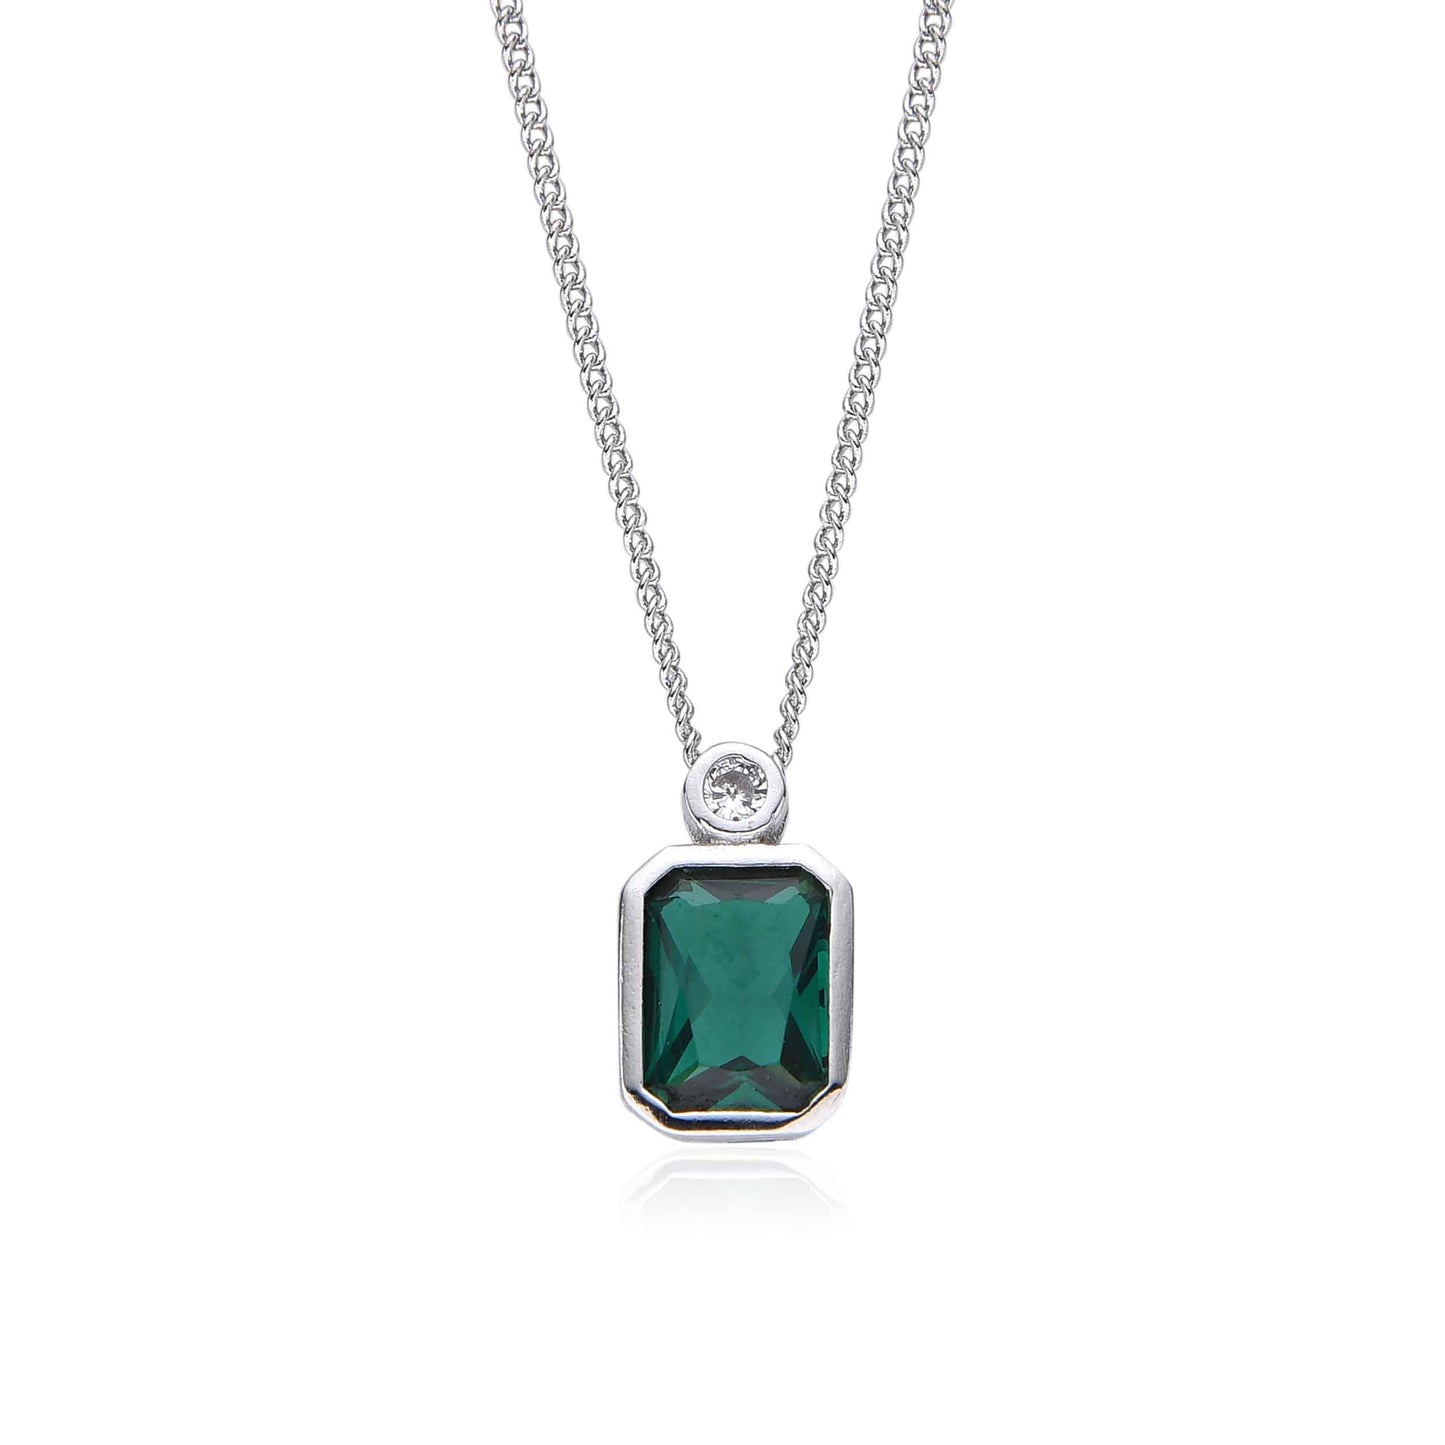 Necklace with Rectangle Emerald Green Pendant